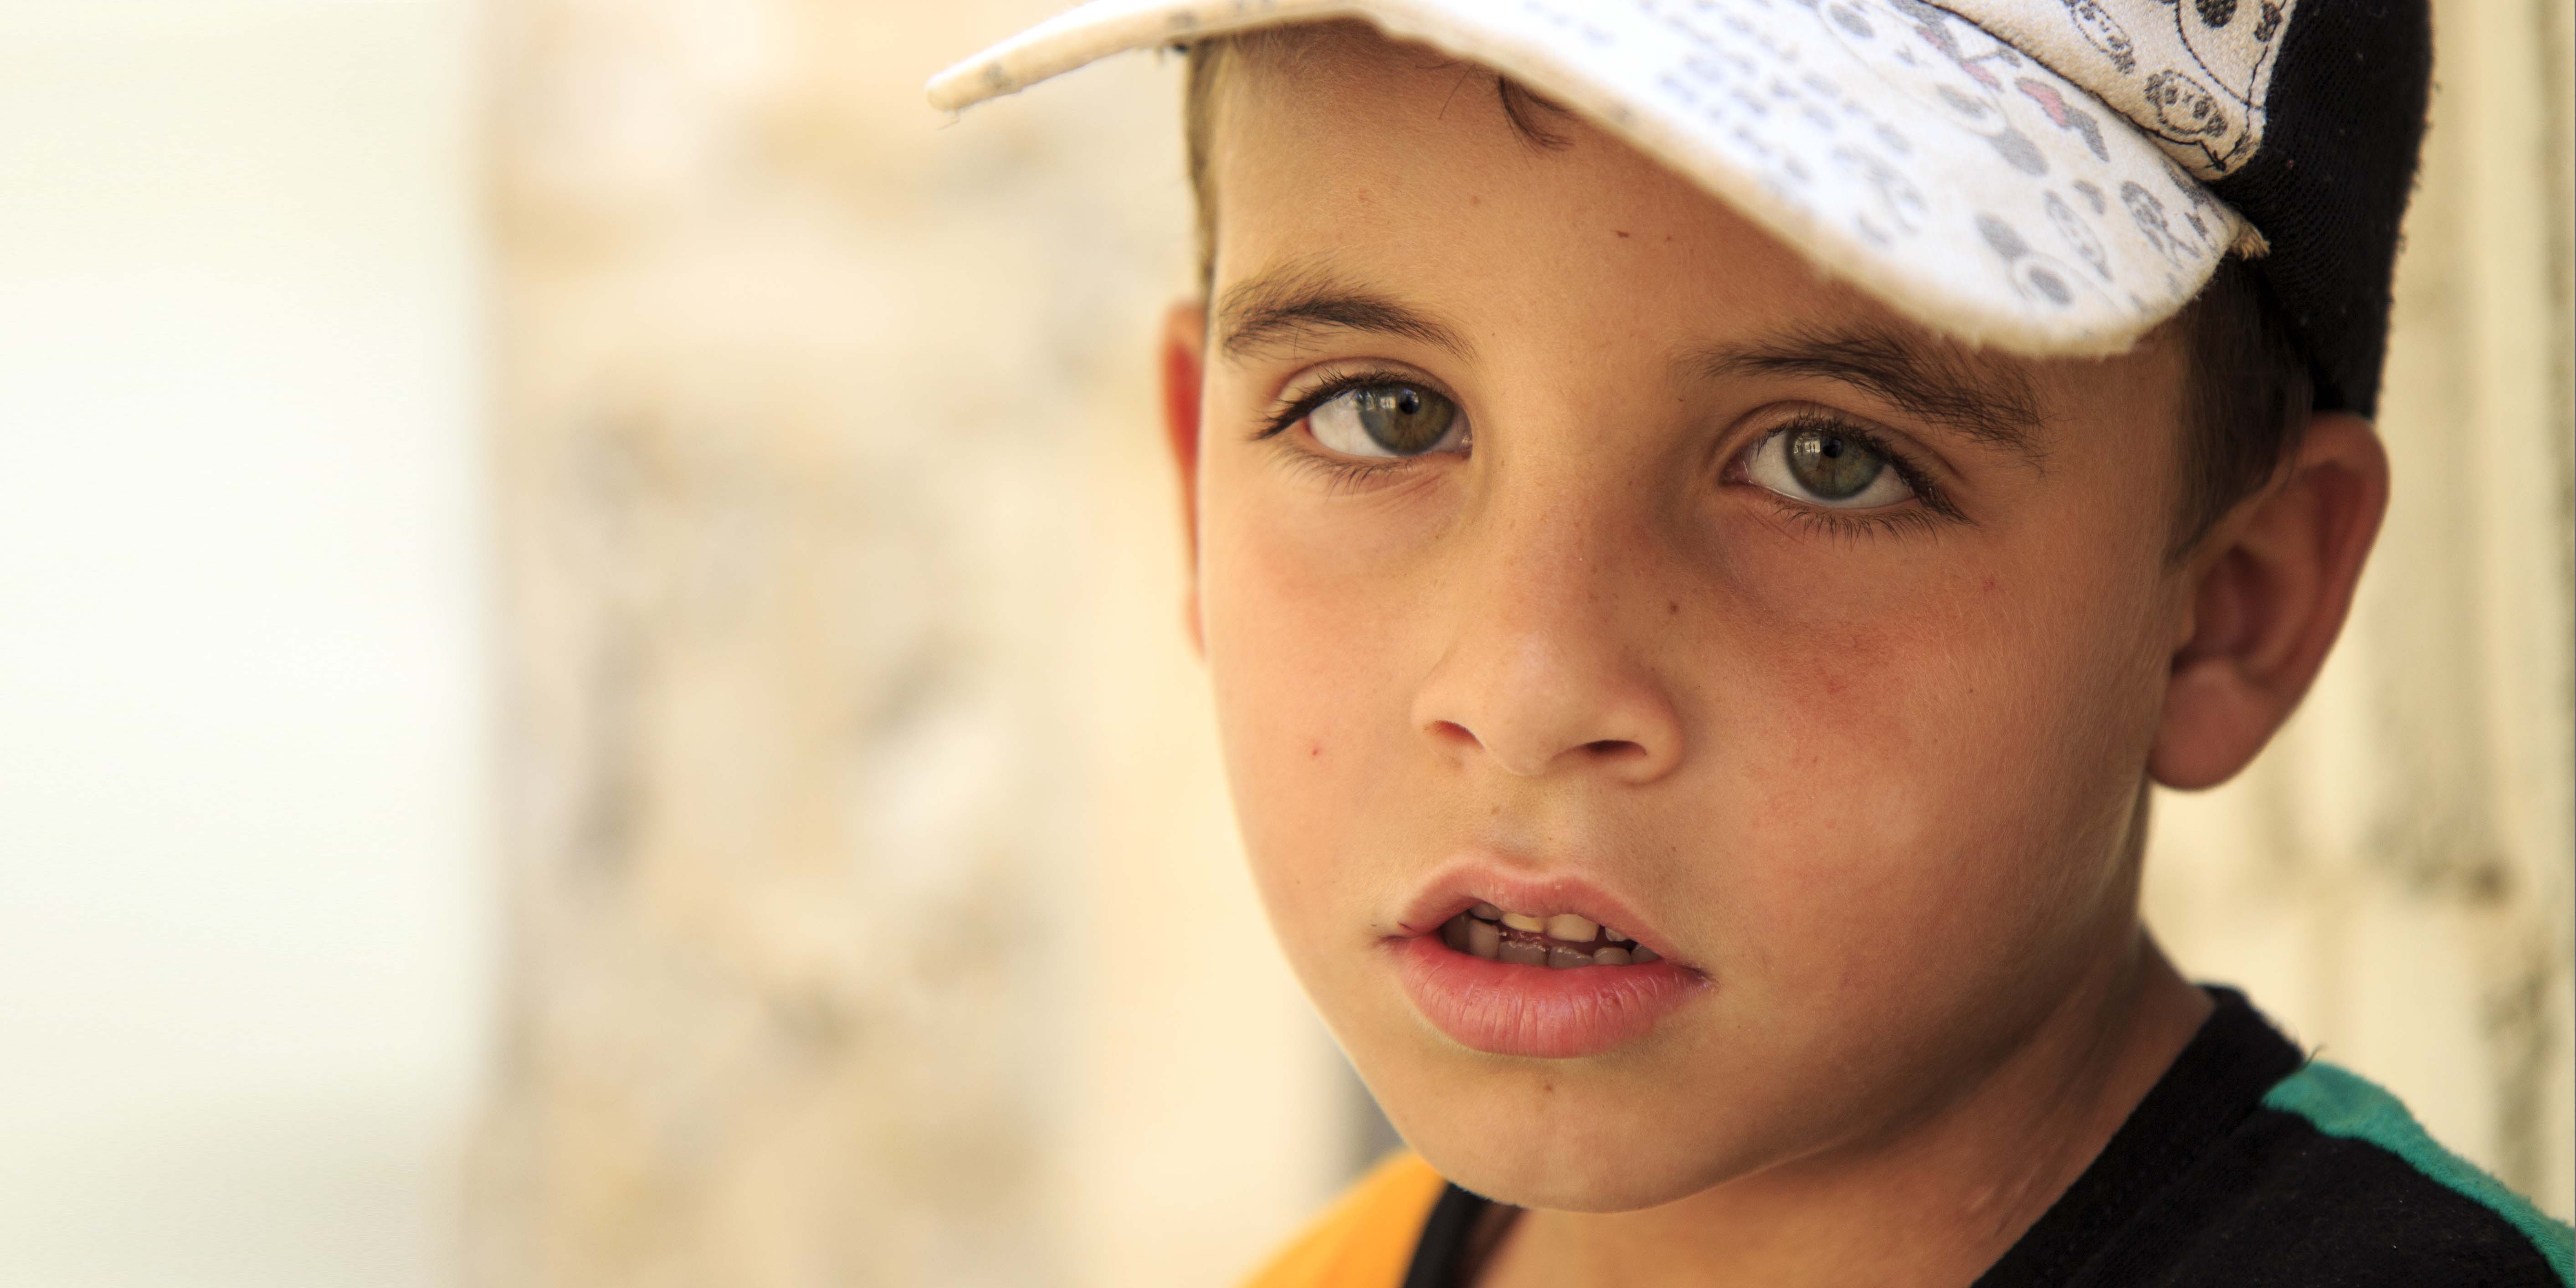 Syria, a little boy in a baseball cap looks into the camera